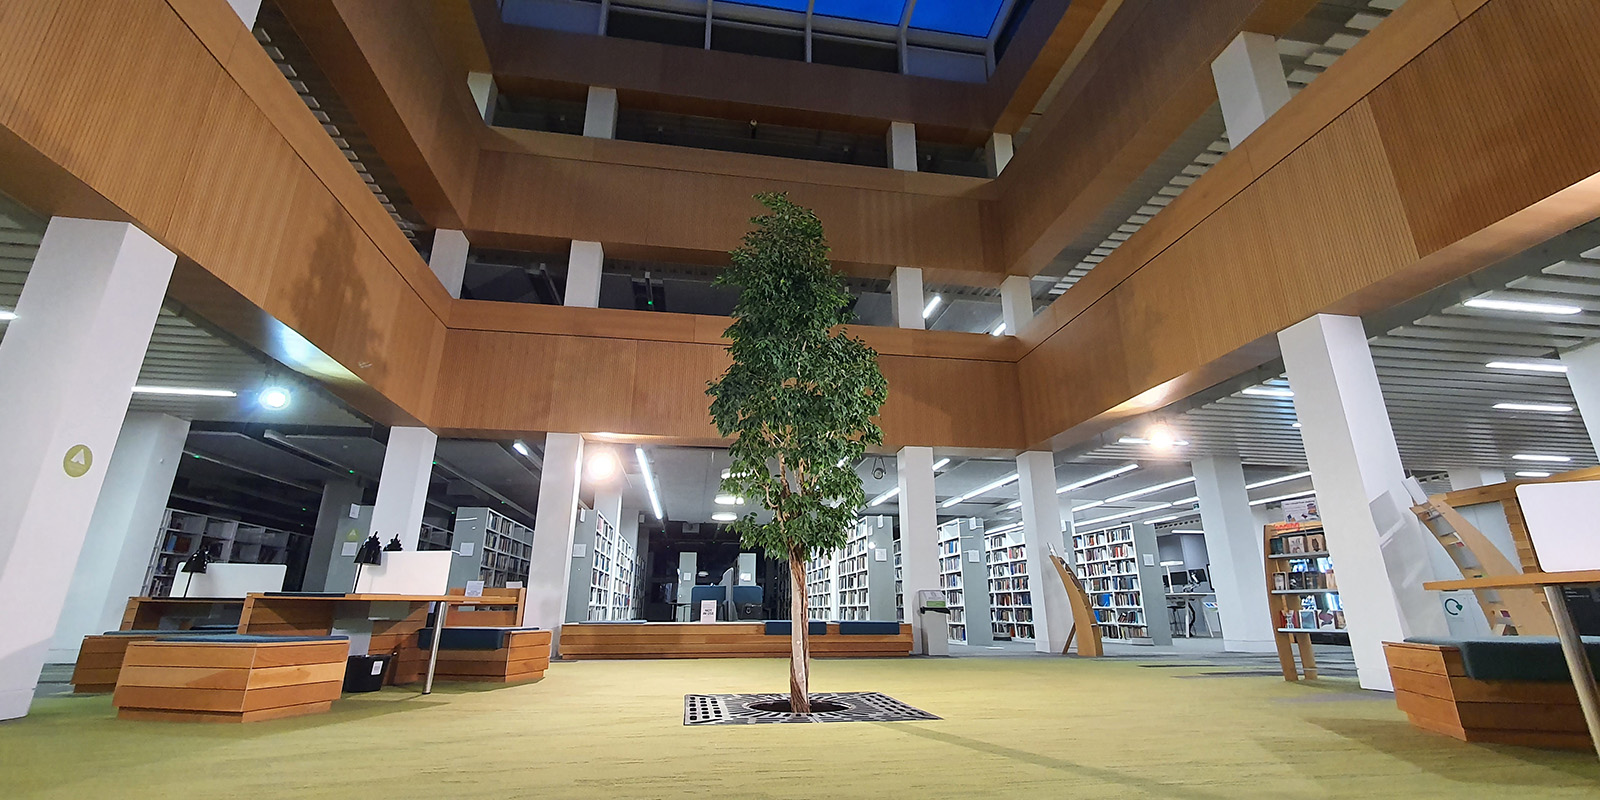 91 library foyer with the living tree in the centre.